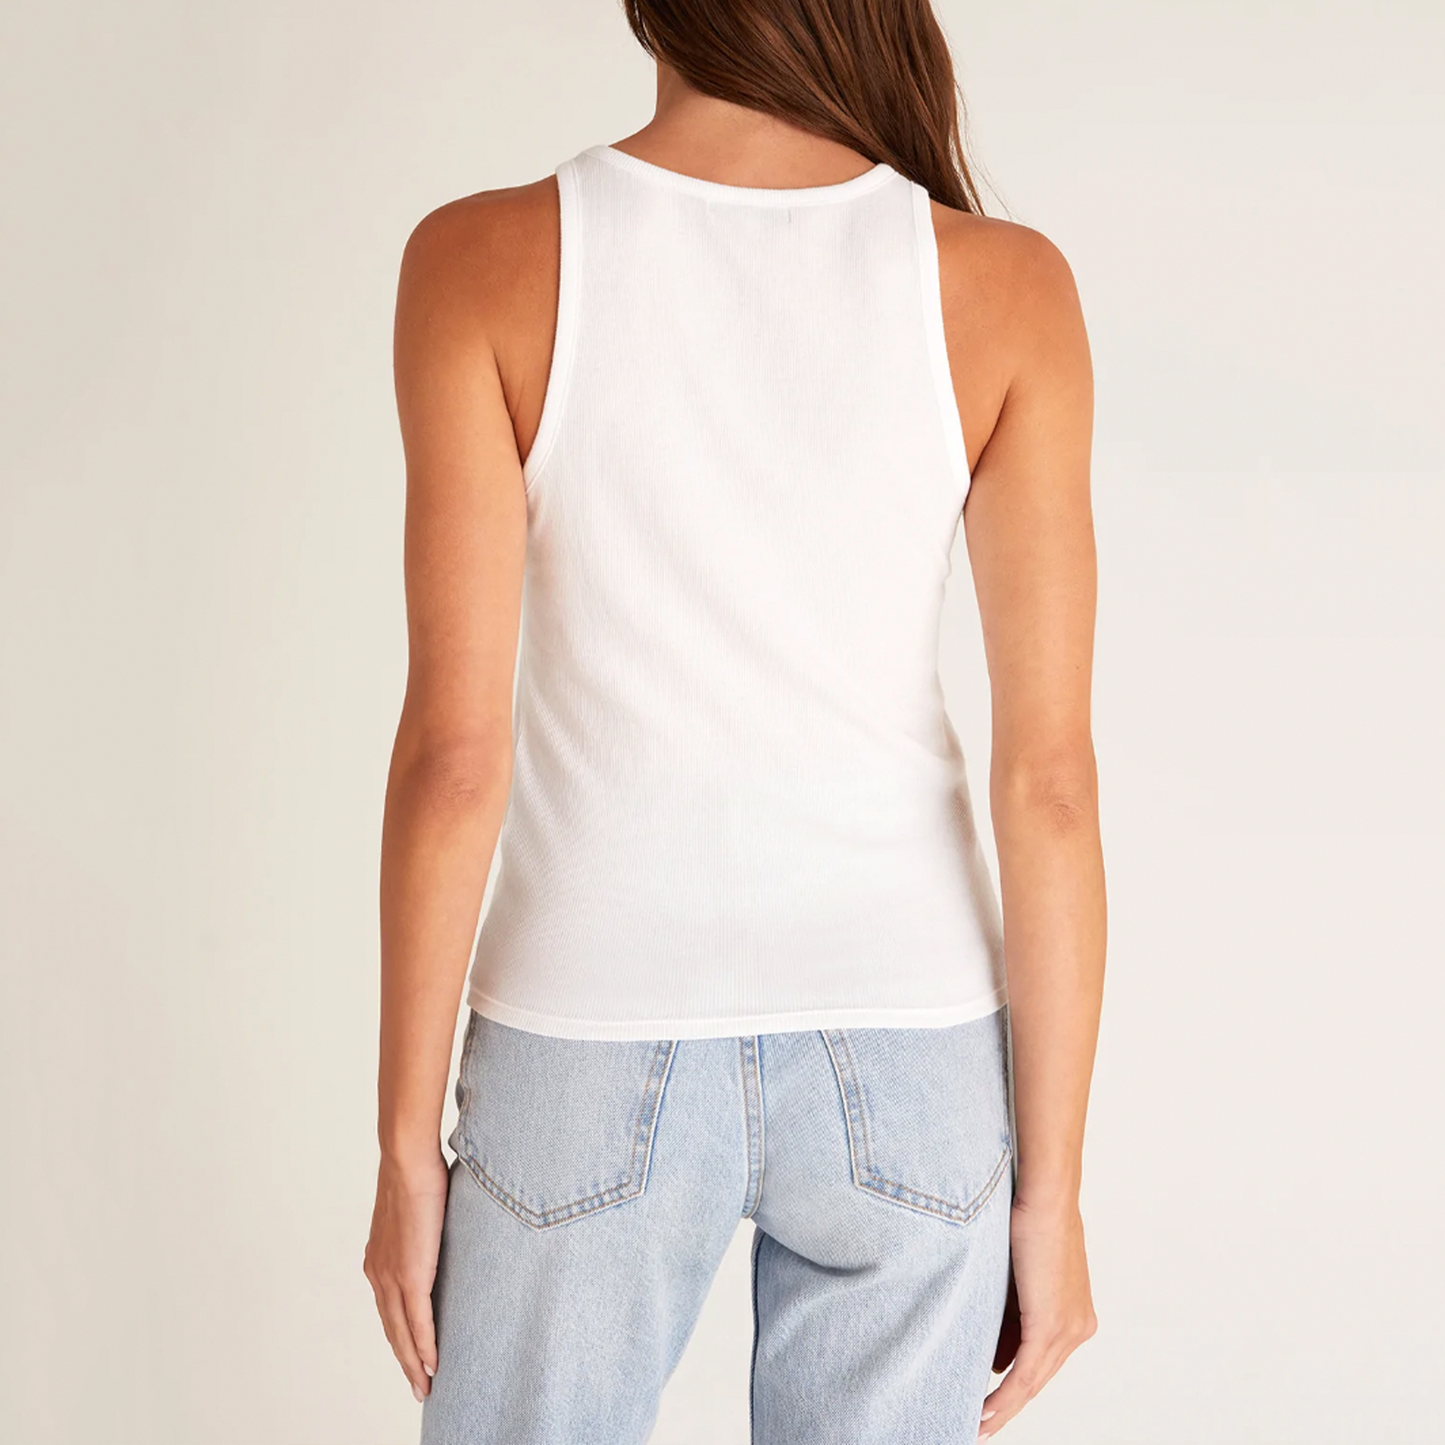 Z Supply High Neck Tank. The higher the better! This top has a flattering high neck and a fitted bodice. Pair this sleek tank over dark denim for an easy, chic look